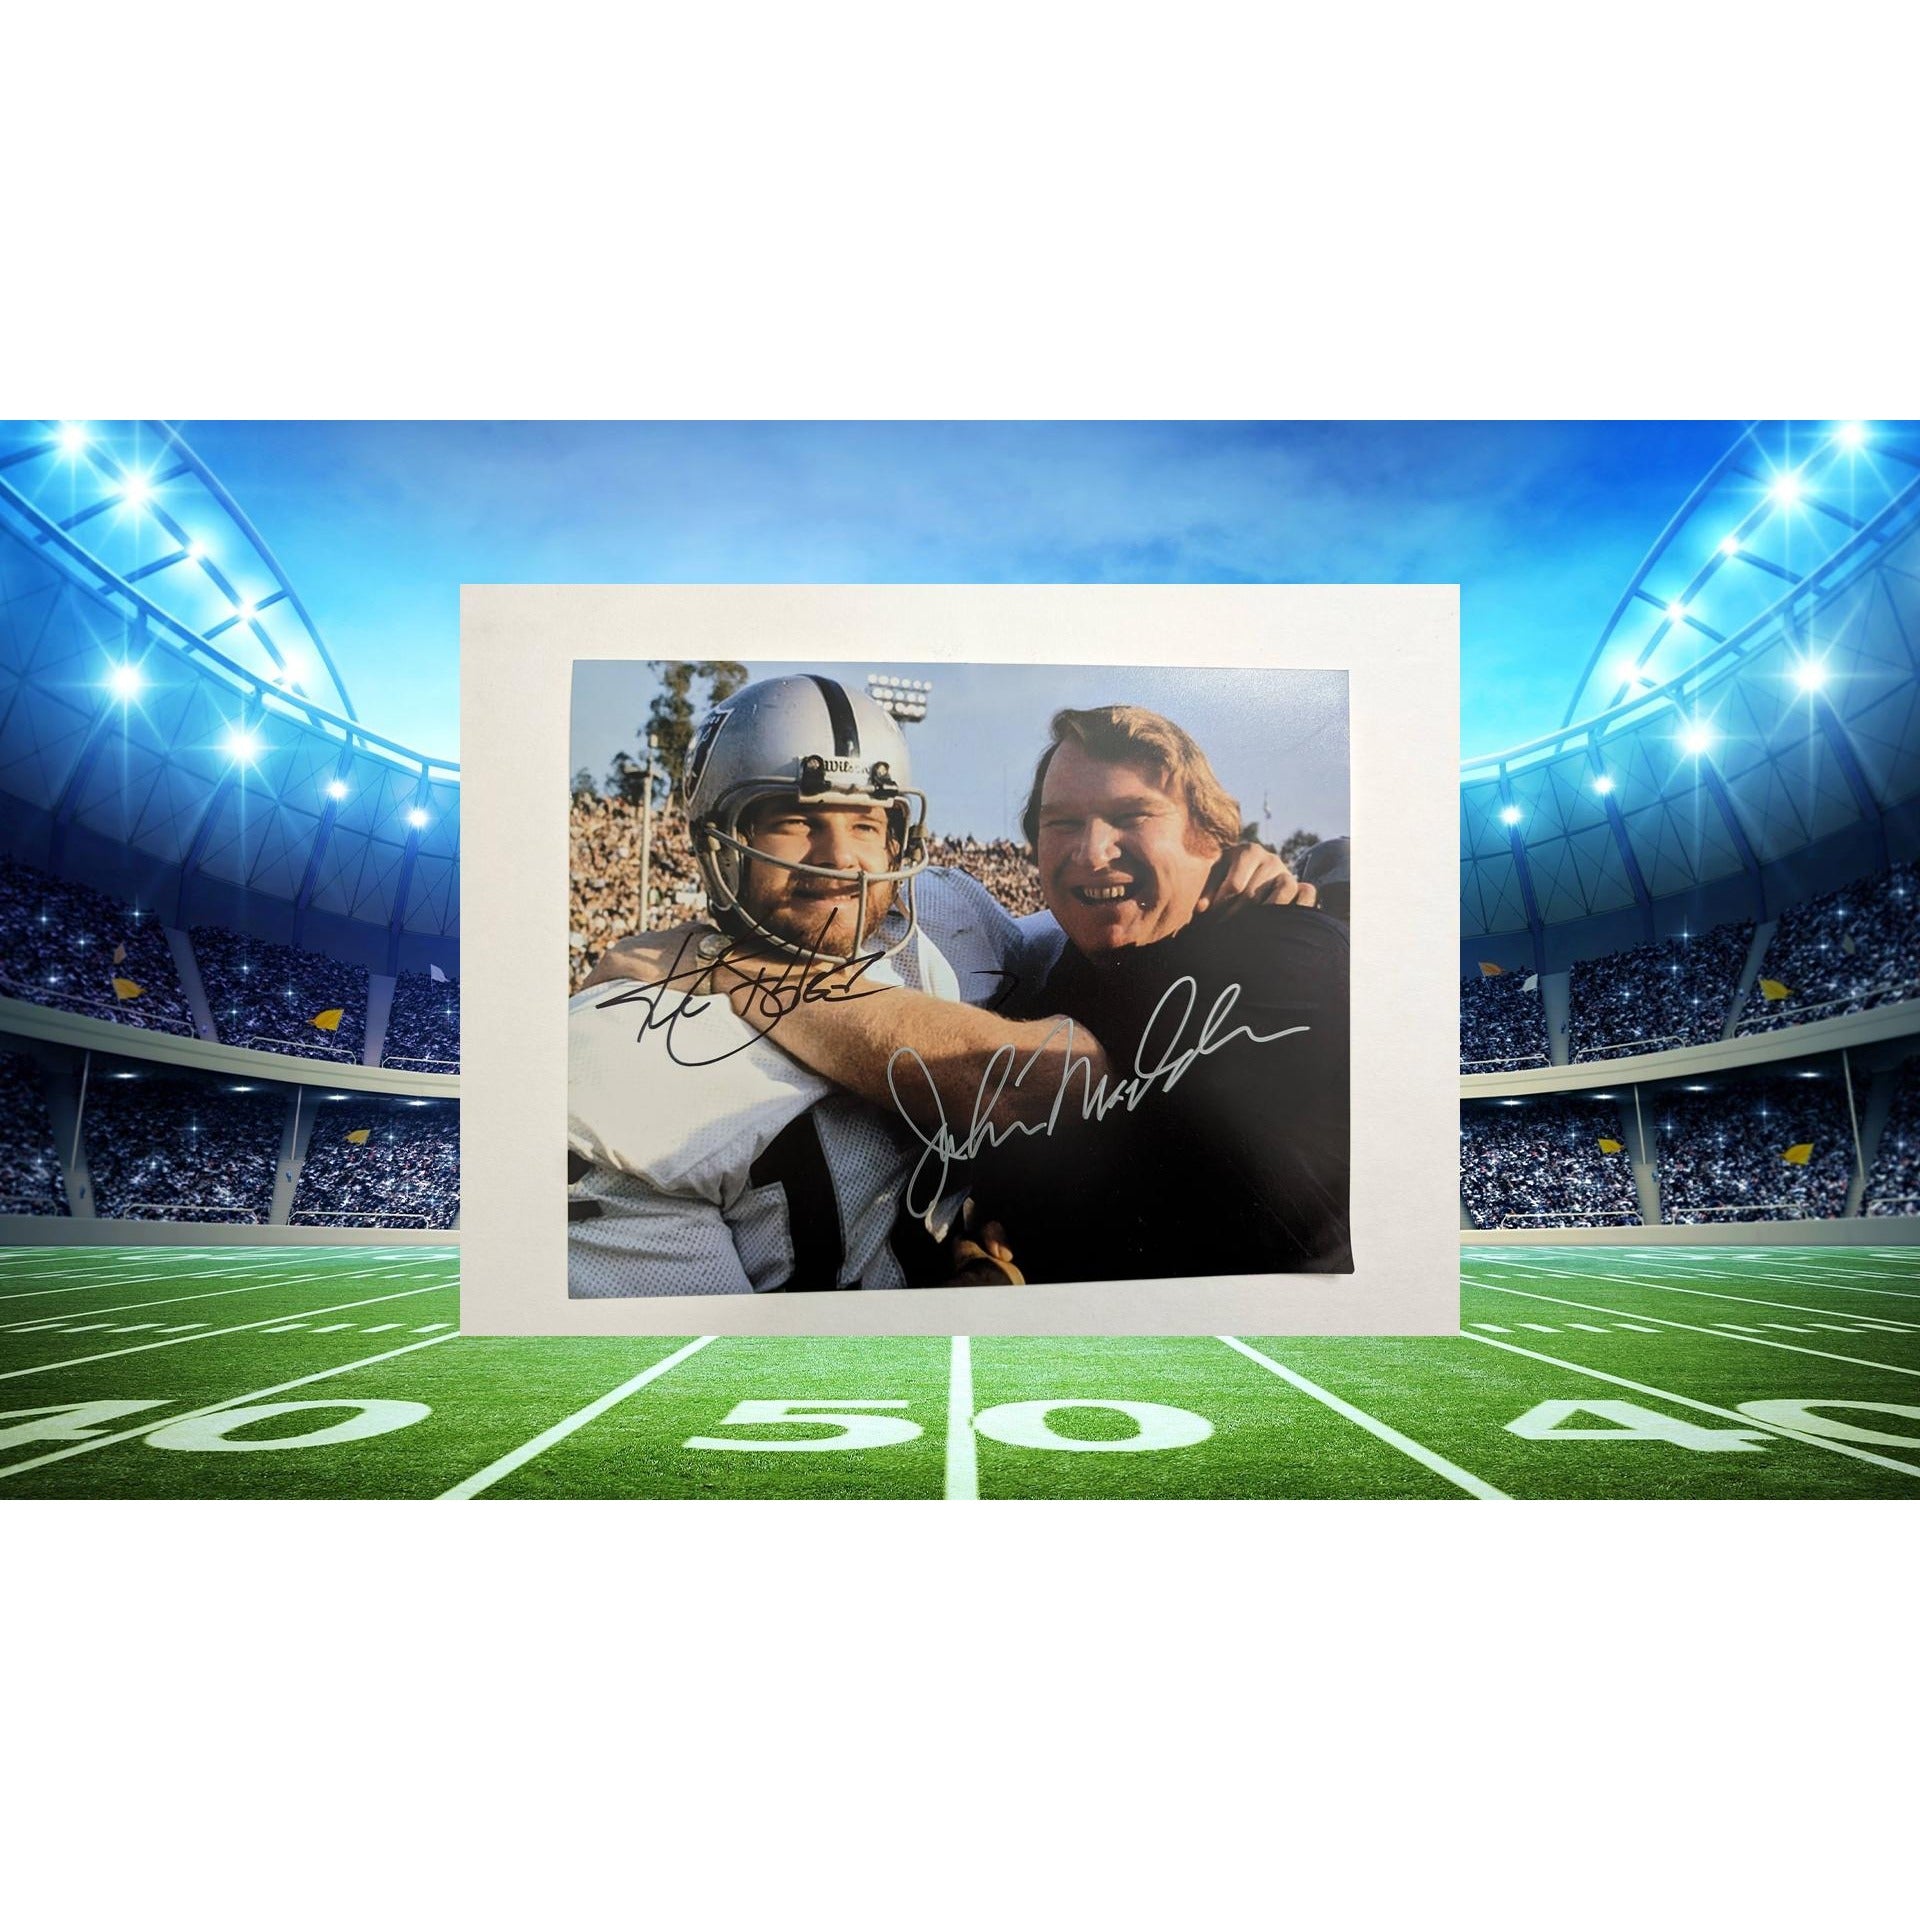 Oakland Raiders John Madden and Kenny "The Snake" Stabler 8x10 photo signed with proof